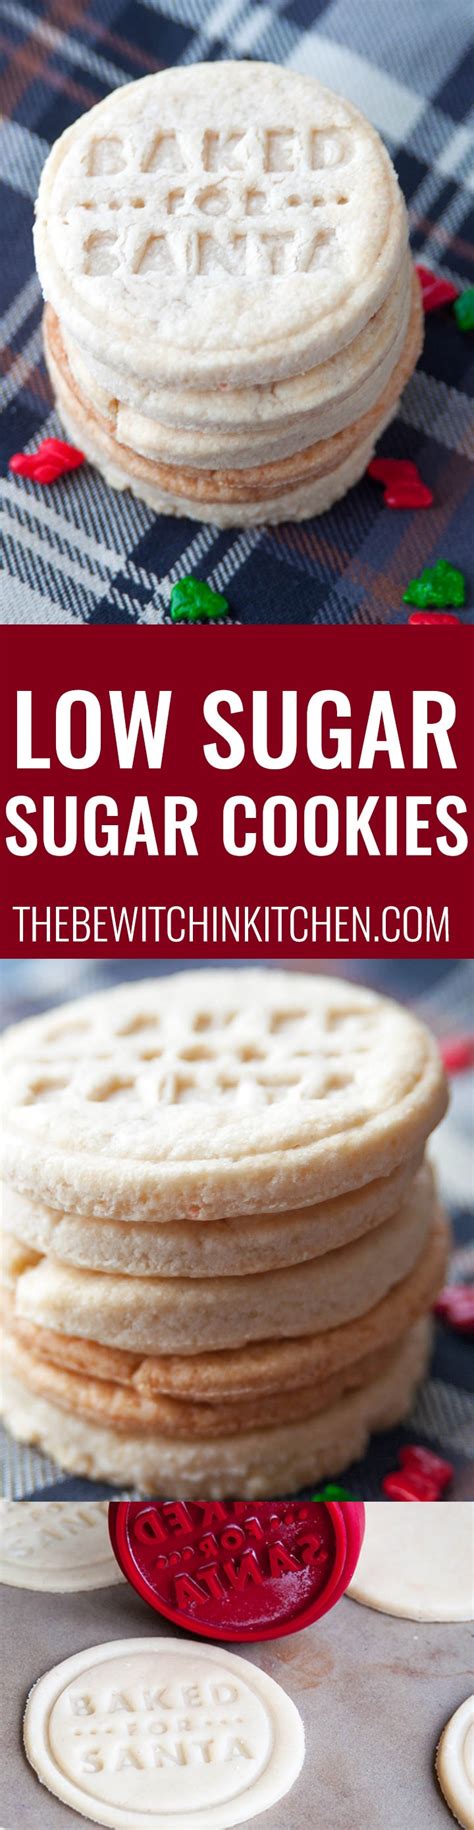 Raisins eggs, 10 pkt sweet and low, 3/4 c. Low Sugar Cookies Recipe | The Bewitchin' Kitchen